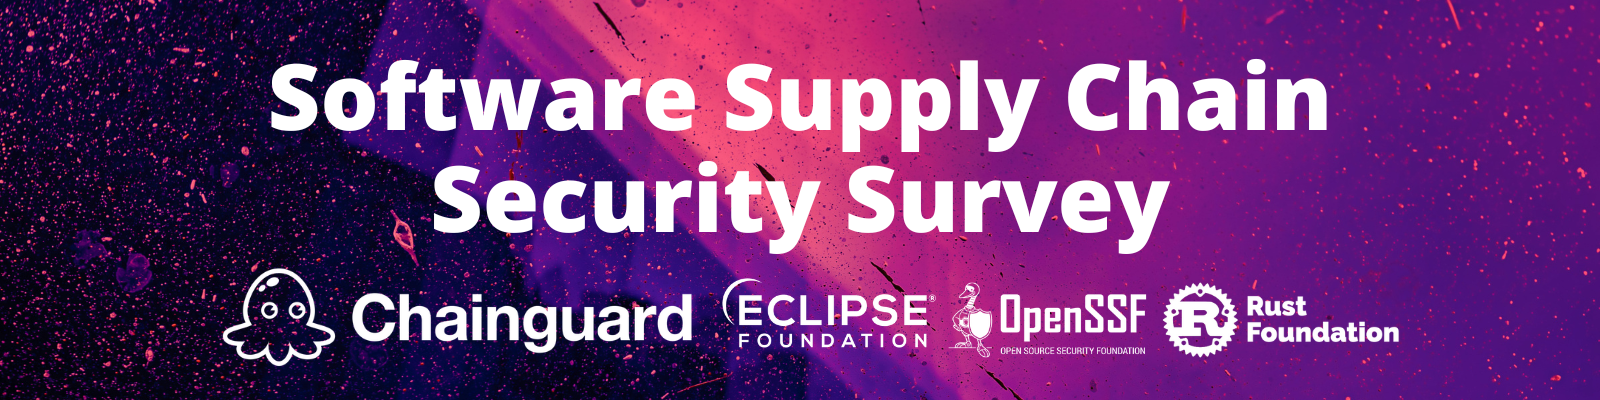 Software Supply Chain Security Survey Header